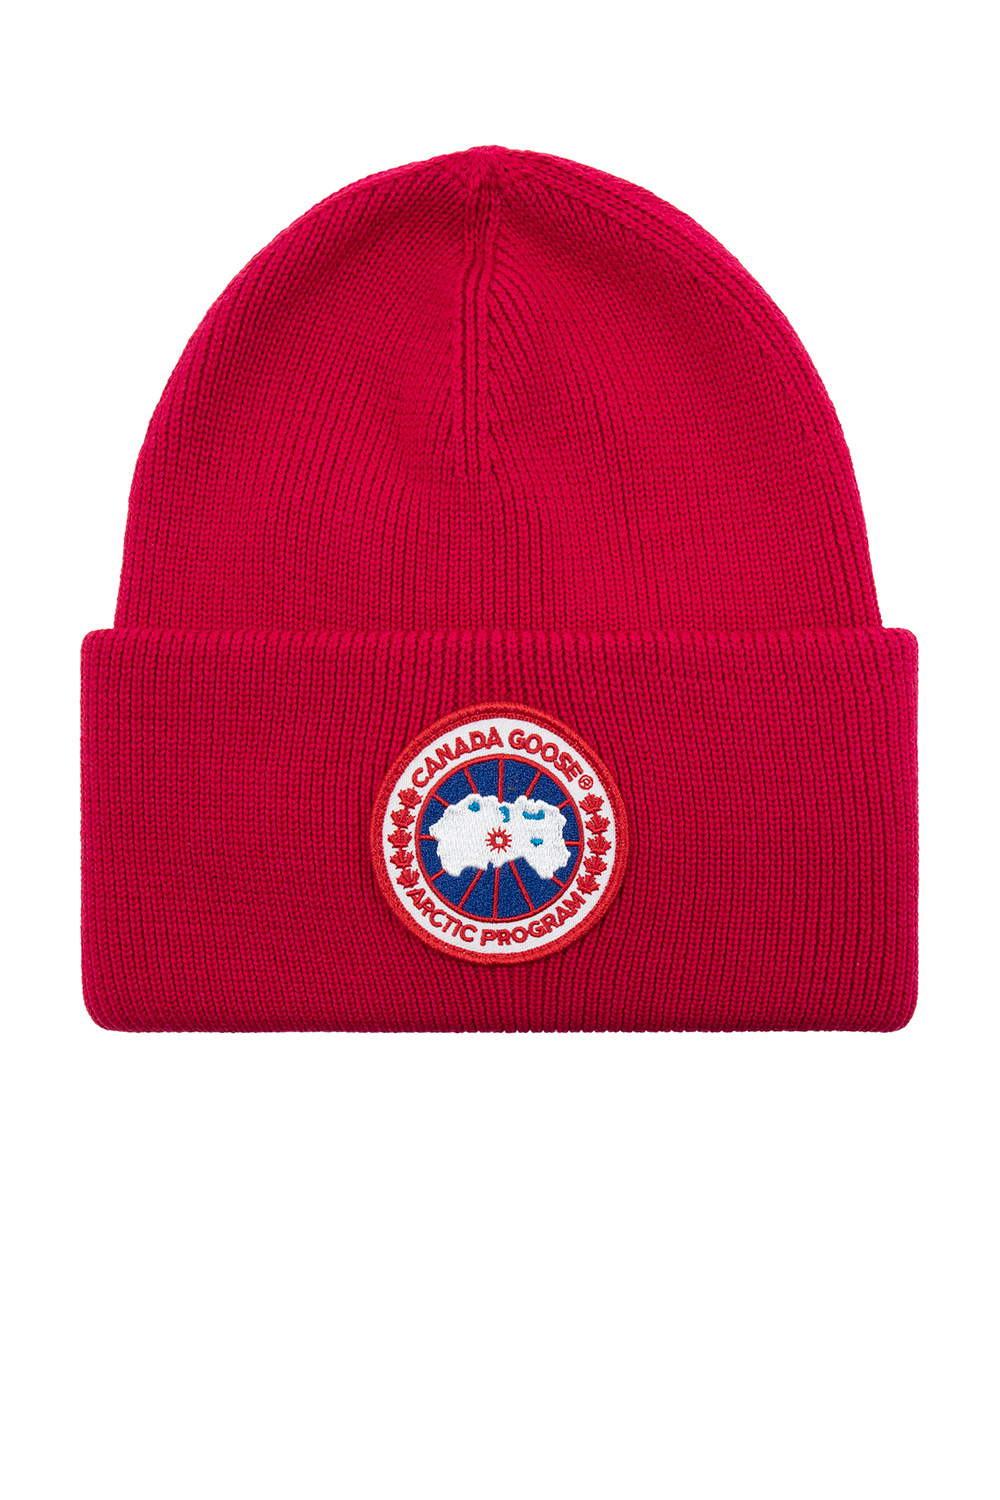 Canada Goose Wool eng hat